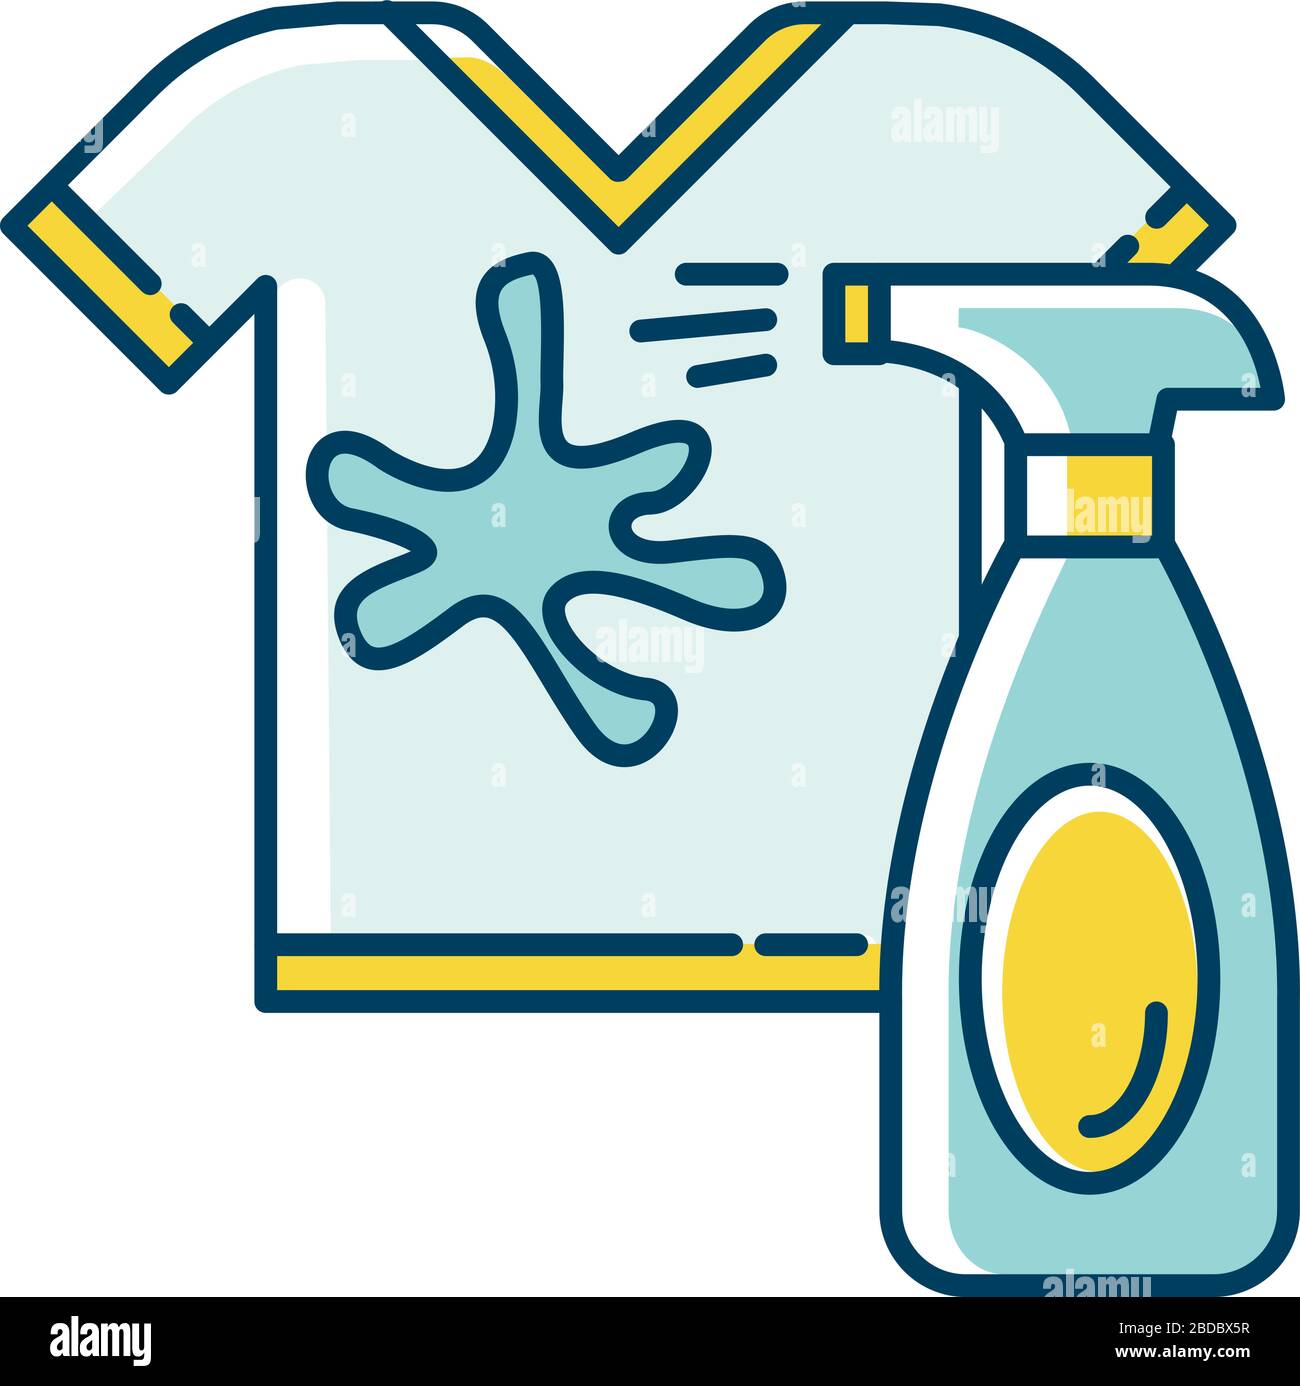 stained clothes clipart